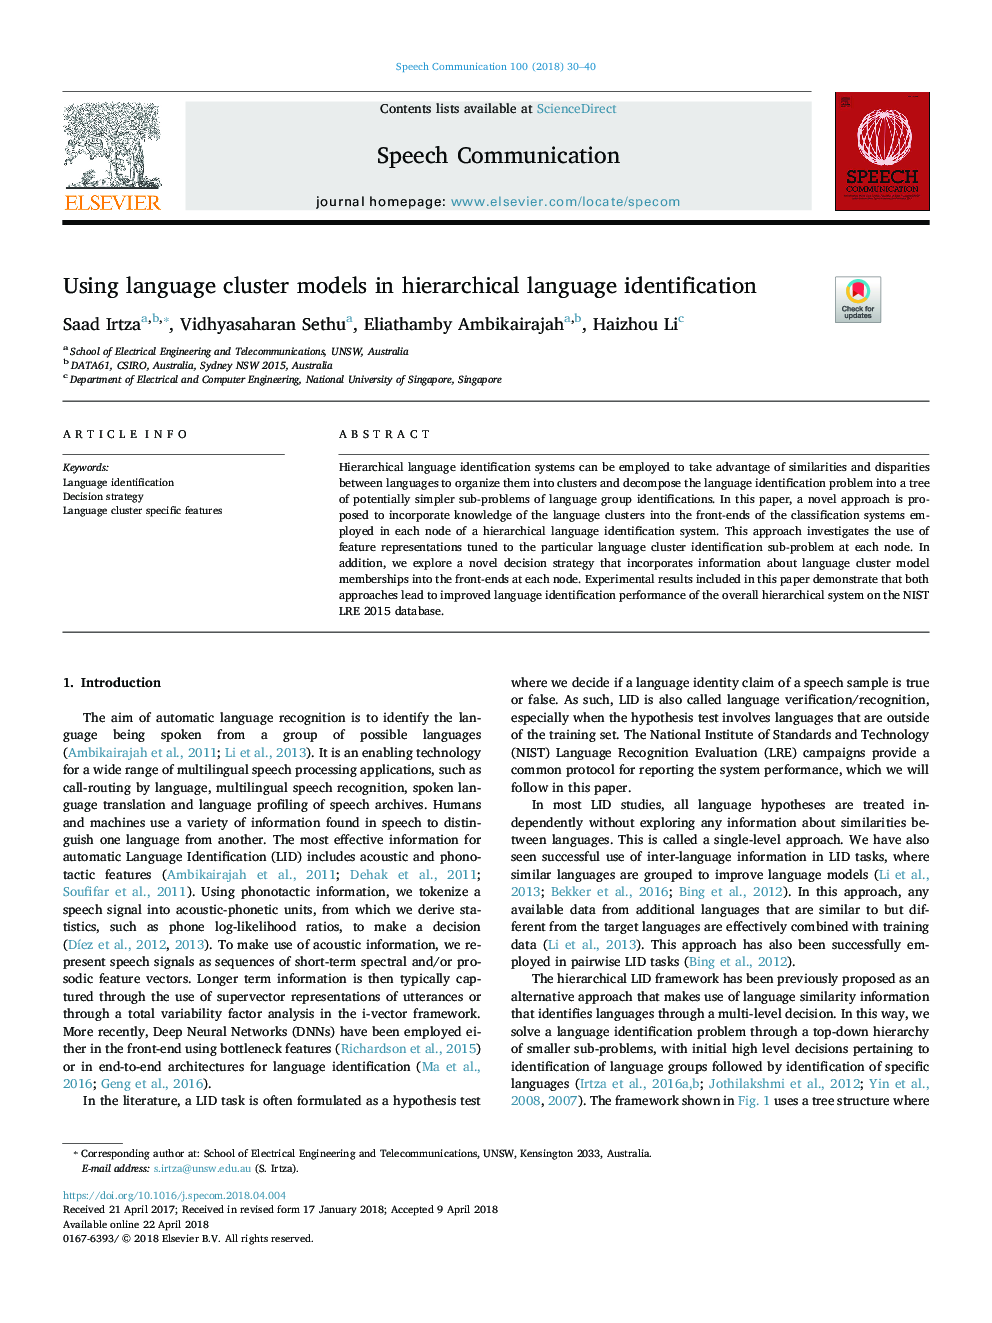 Using language cluster models in hierarchical language identification